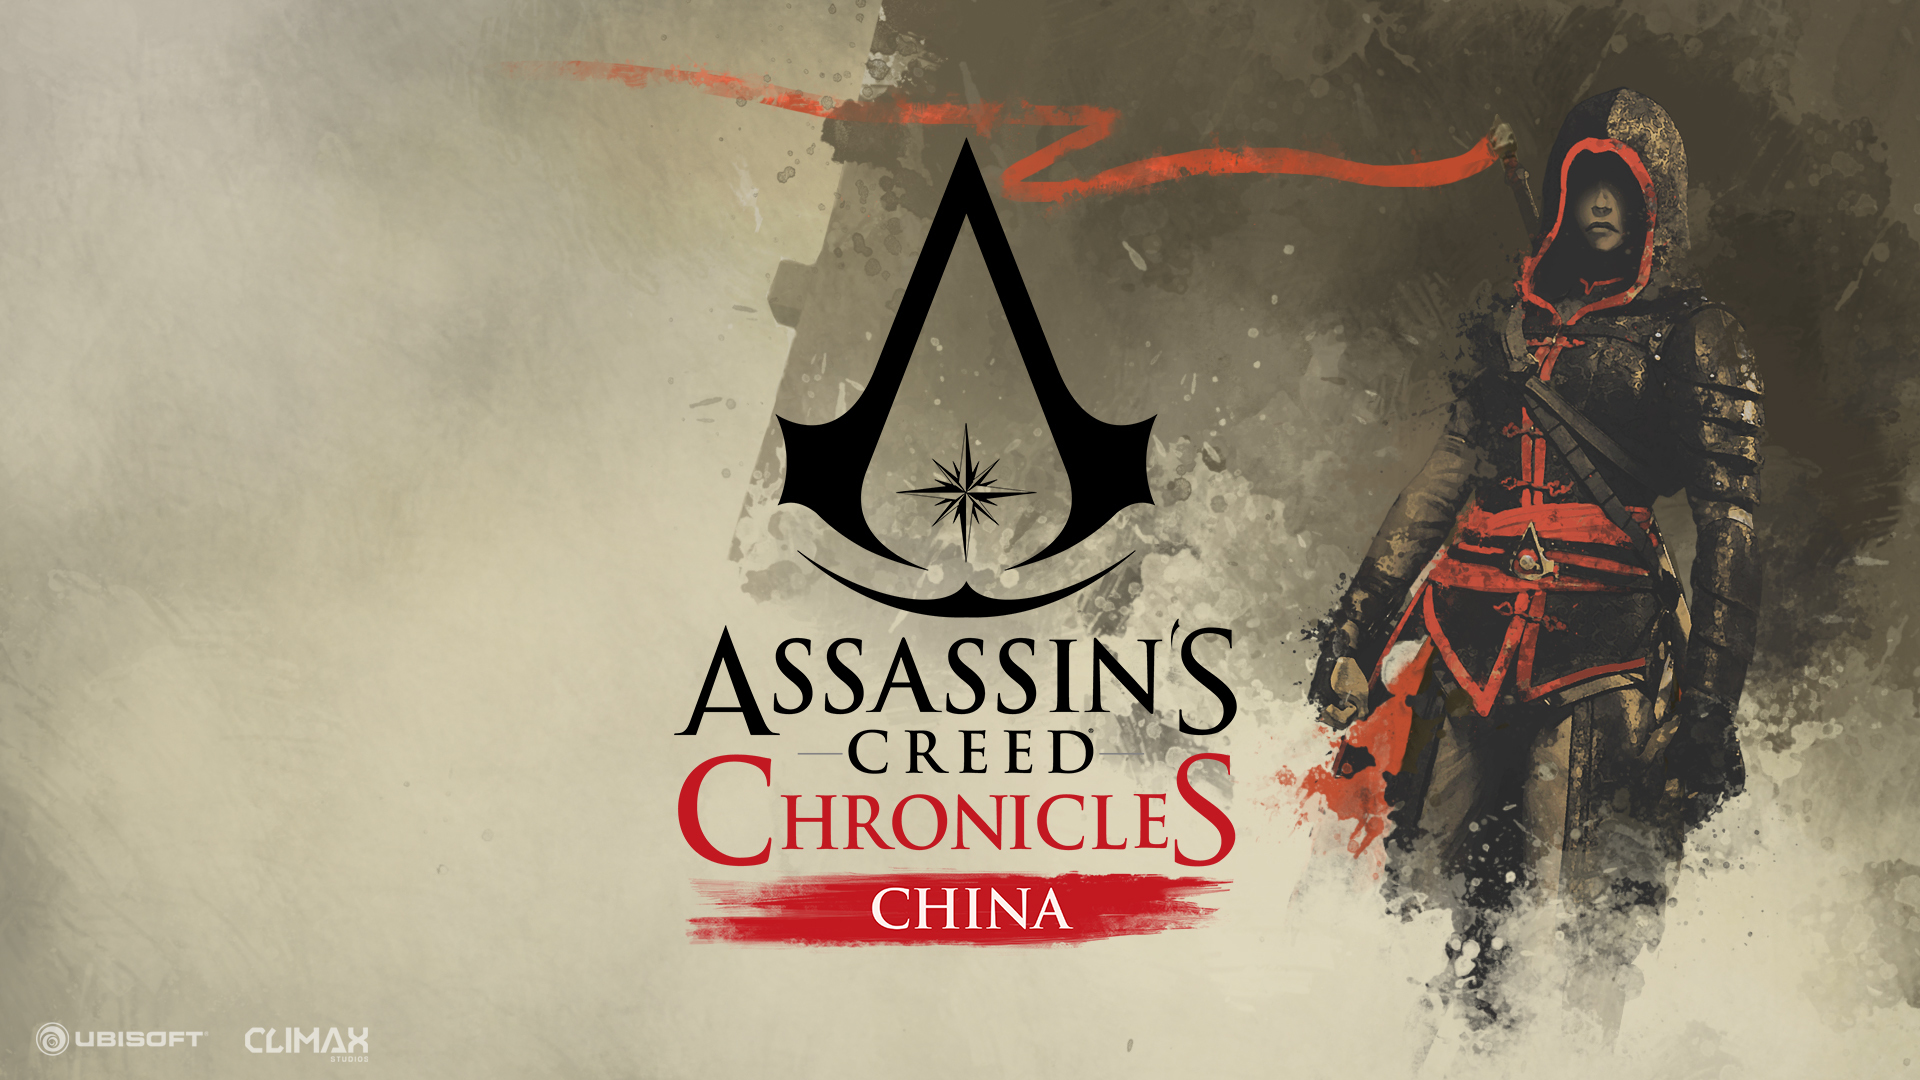 Assassins creed chronicles trilogy steam фото 35